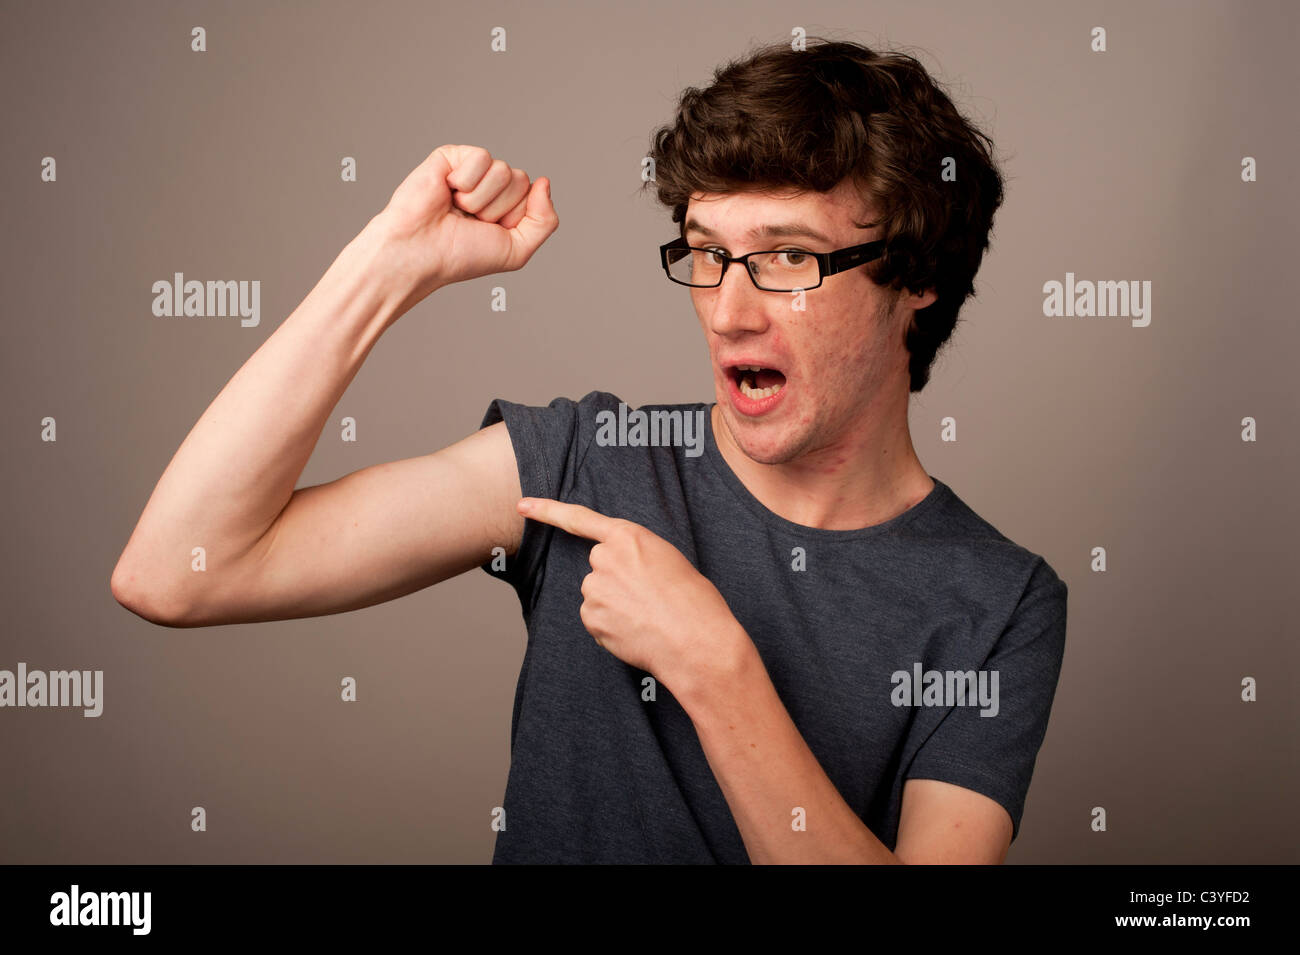 a-spotty-faced-weak-feeble-geek-nerd-young-man-with-thin-arms-wearing-C3YFD2.jpg